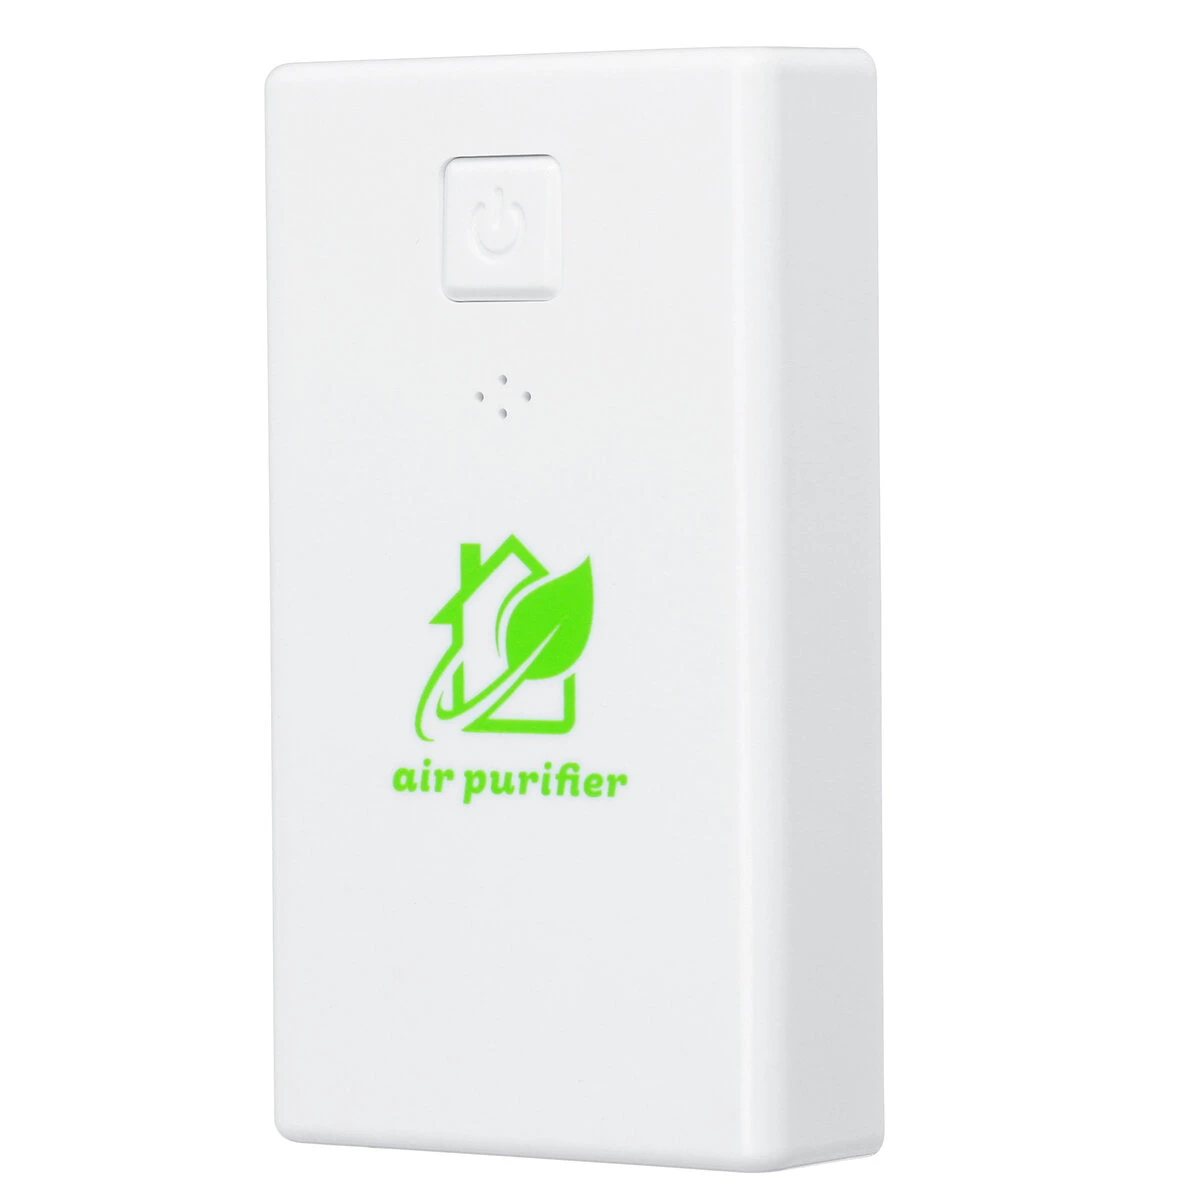 Portable Plug in Air Purifier Negative Ion Air Purification Remove Formaldehyde Dust Eliminate Odor Low Noise Energy Saving